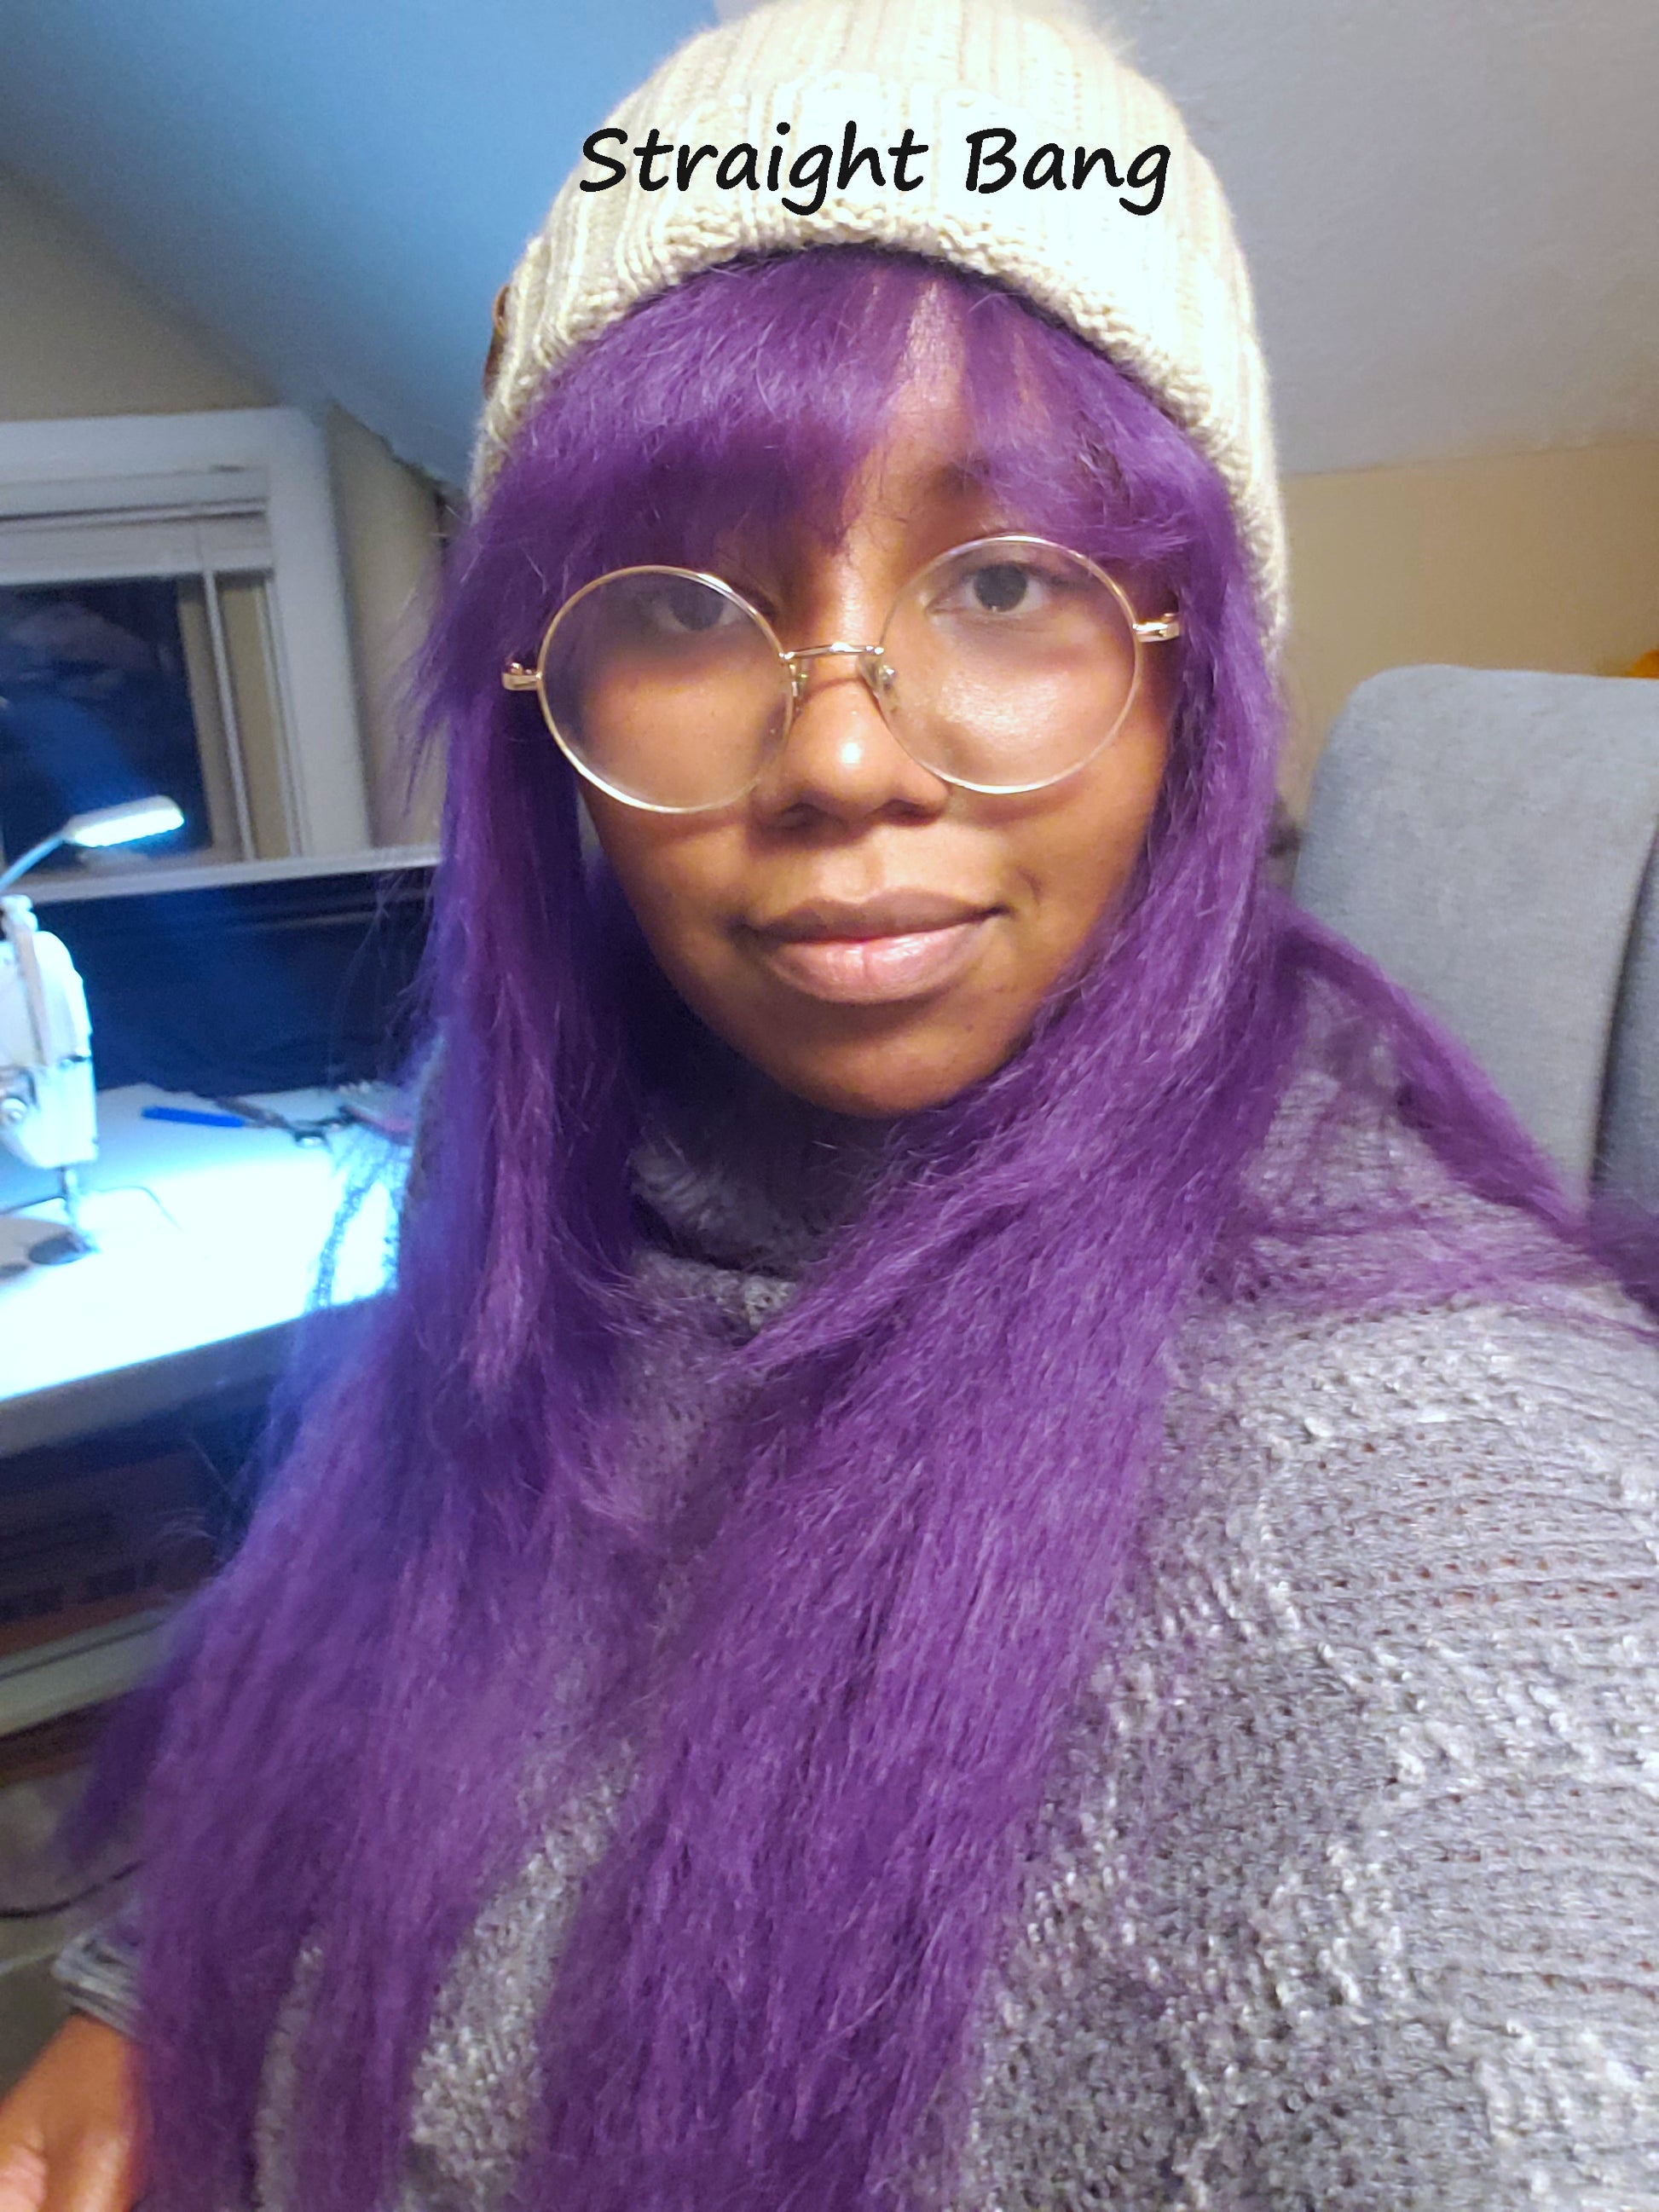 example of straight bang being worn on purple craze wig